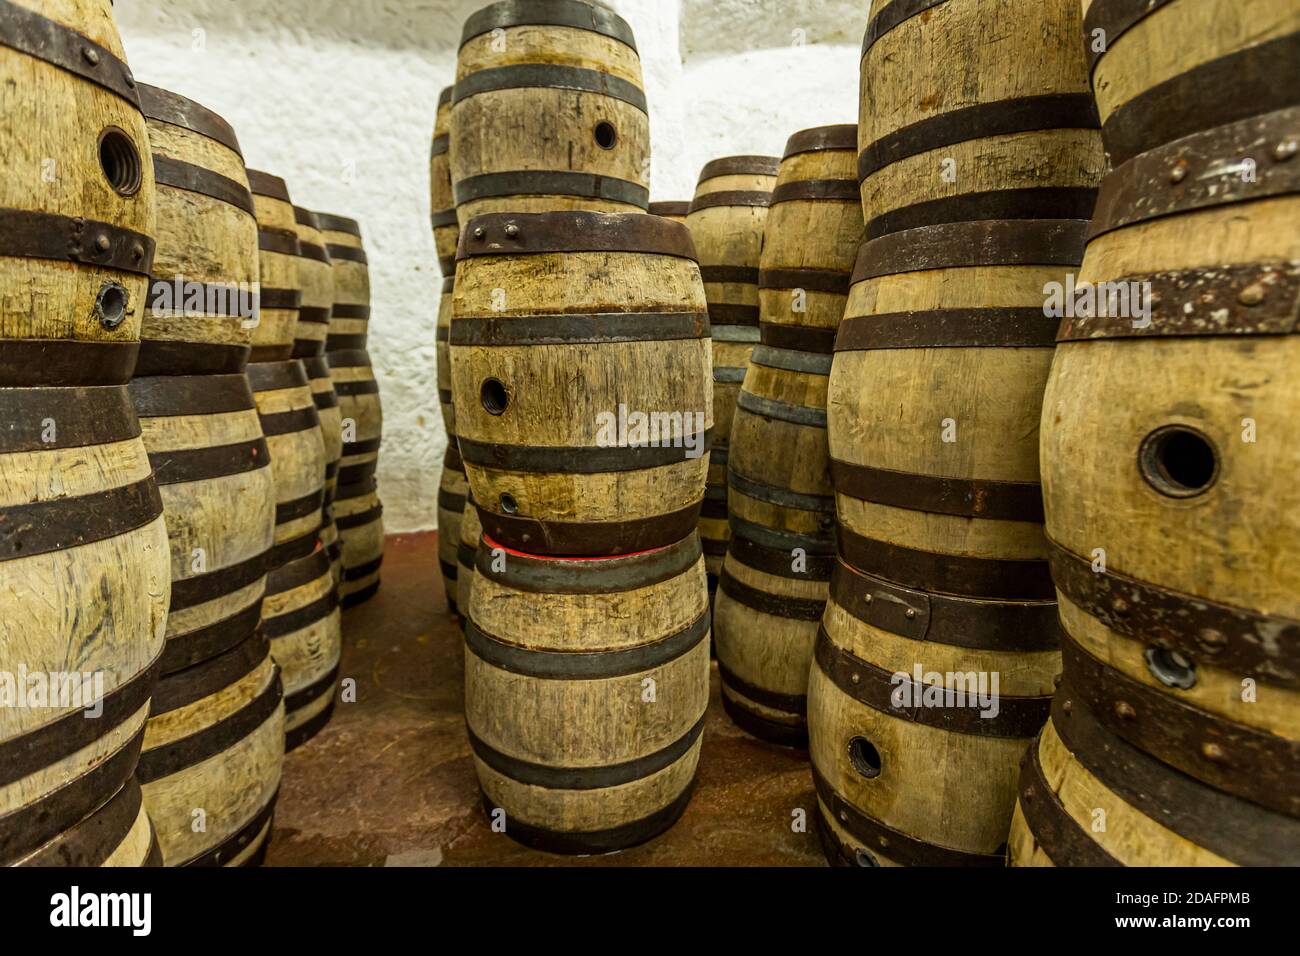 In the rock-cut celler on Stephansberg the Heller-Bräu, which has been run by the Trum family since 1866. Brewers used to be often Büttner, who made the barrels. Heller Brewery of Schlenkerla Smoke Beer Bamberg, Germany Stock Photo